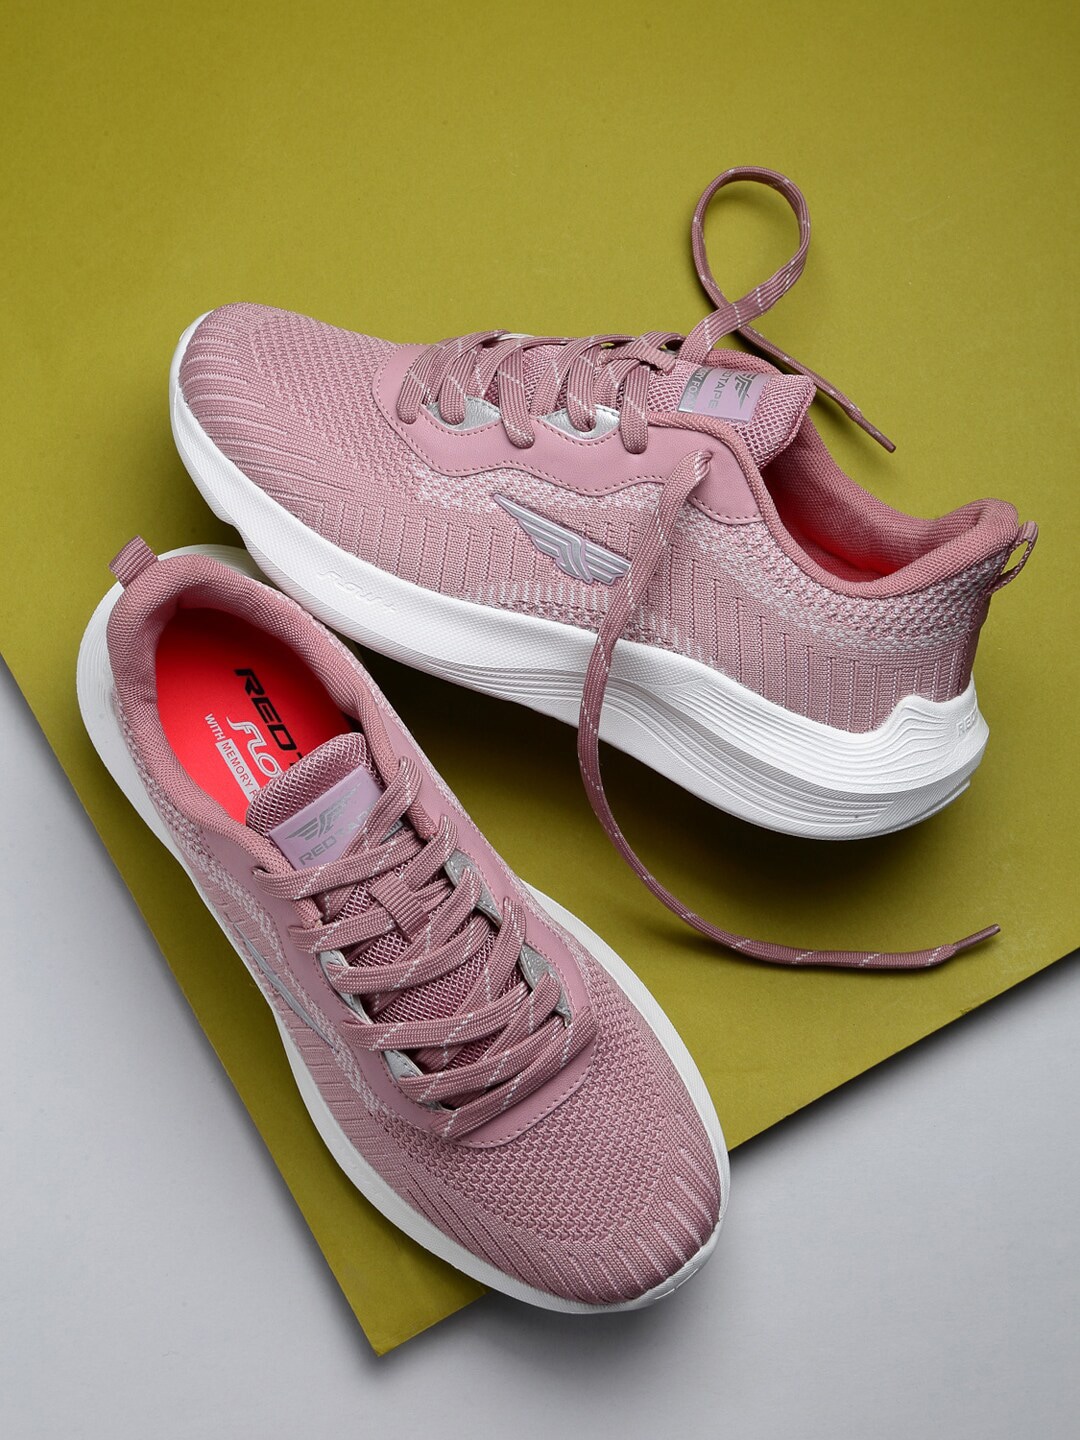 Red Tape Women Pink Walking Shoes Price in India